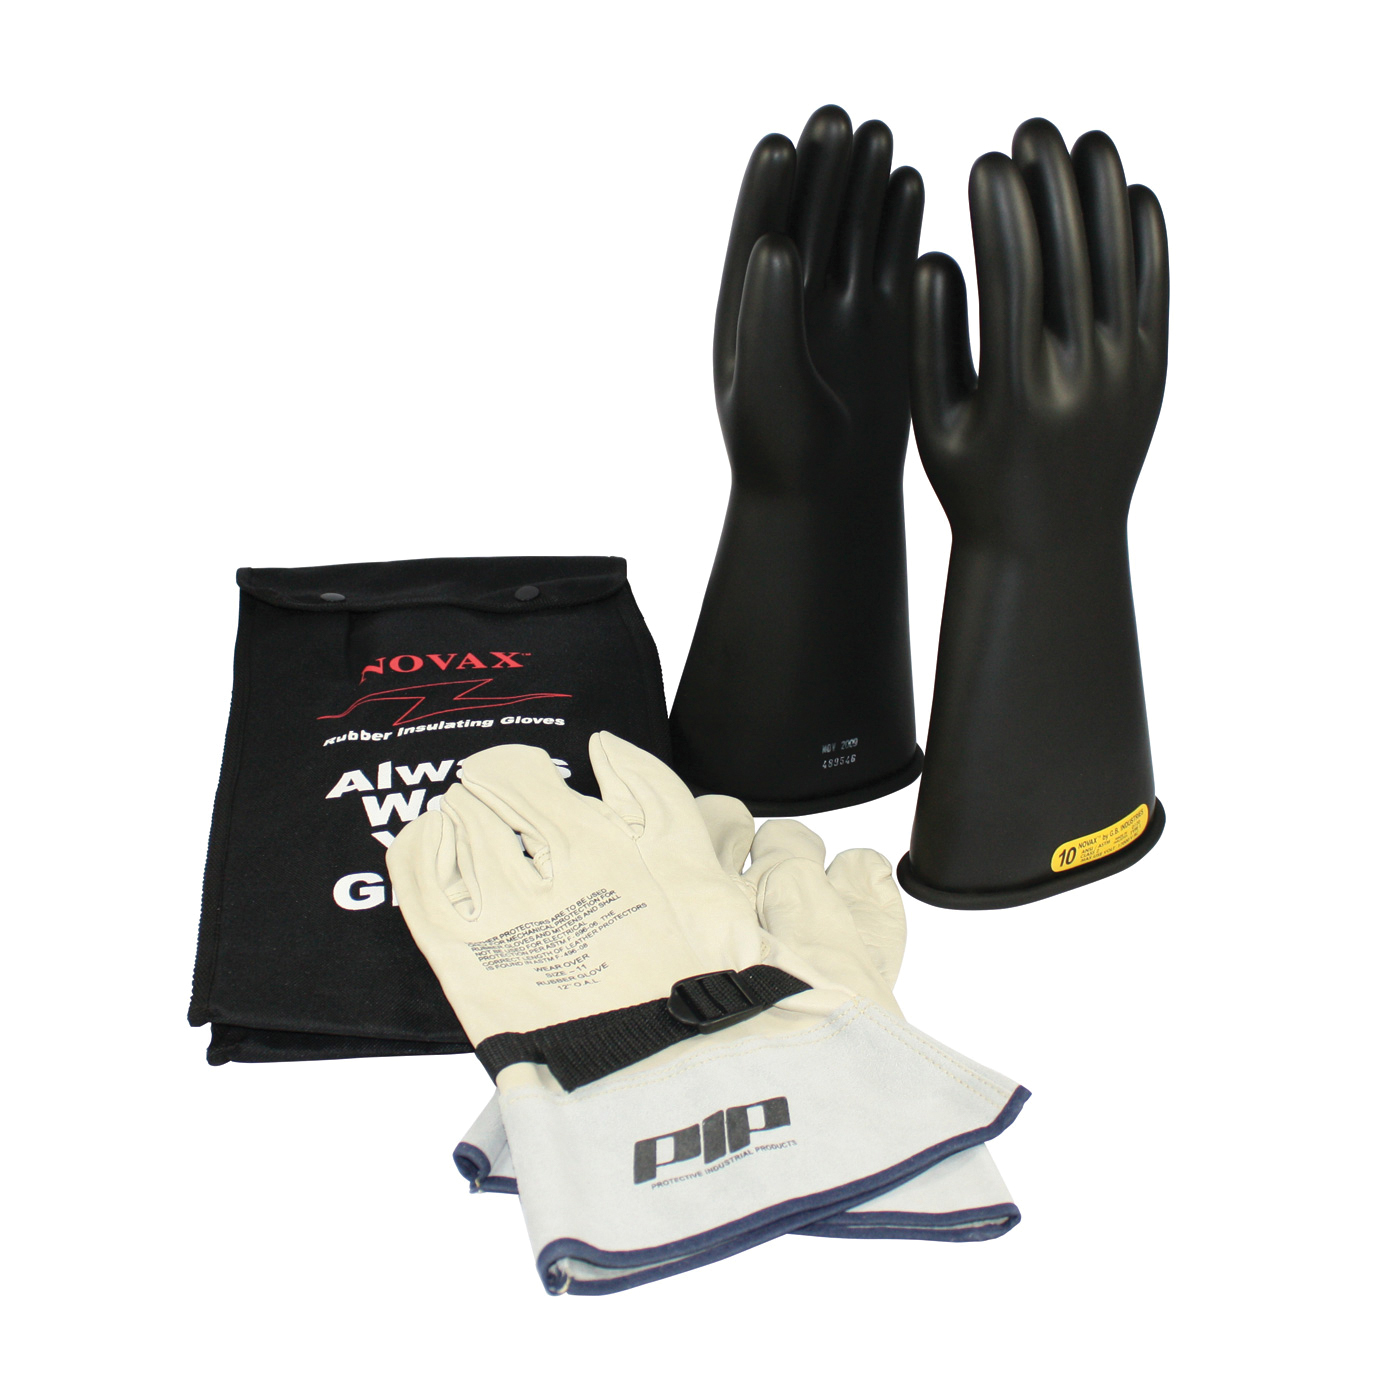 Novax® 150-SK-2/7-KIT Insulating Unisex Electrical Safety Gloves Kit, SZ 7, Cowhide Leather/Natural Rubber, Black/Natural, 14 in L, ASTM Class: Class 2, 17000 VAC, 25500 VDC Max Use Voltage